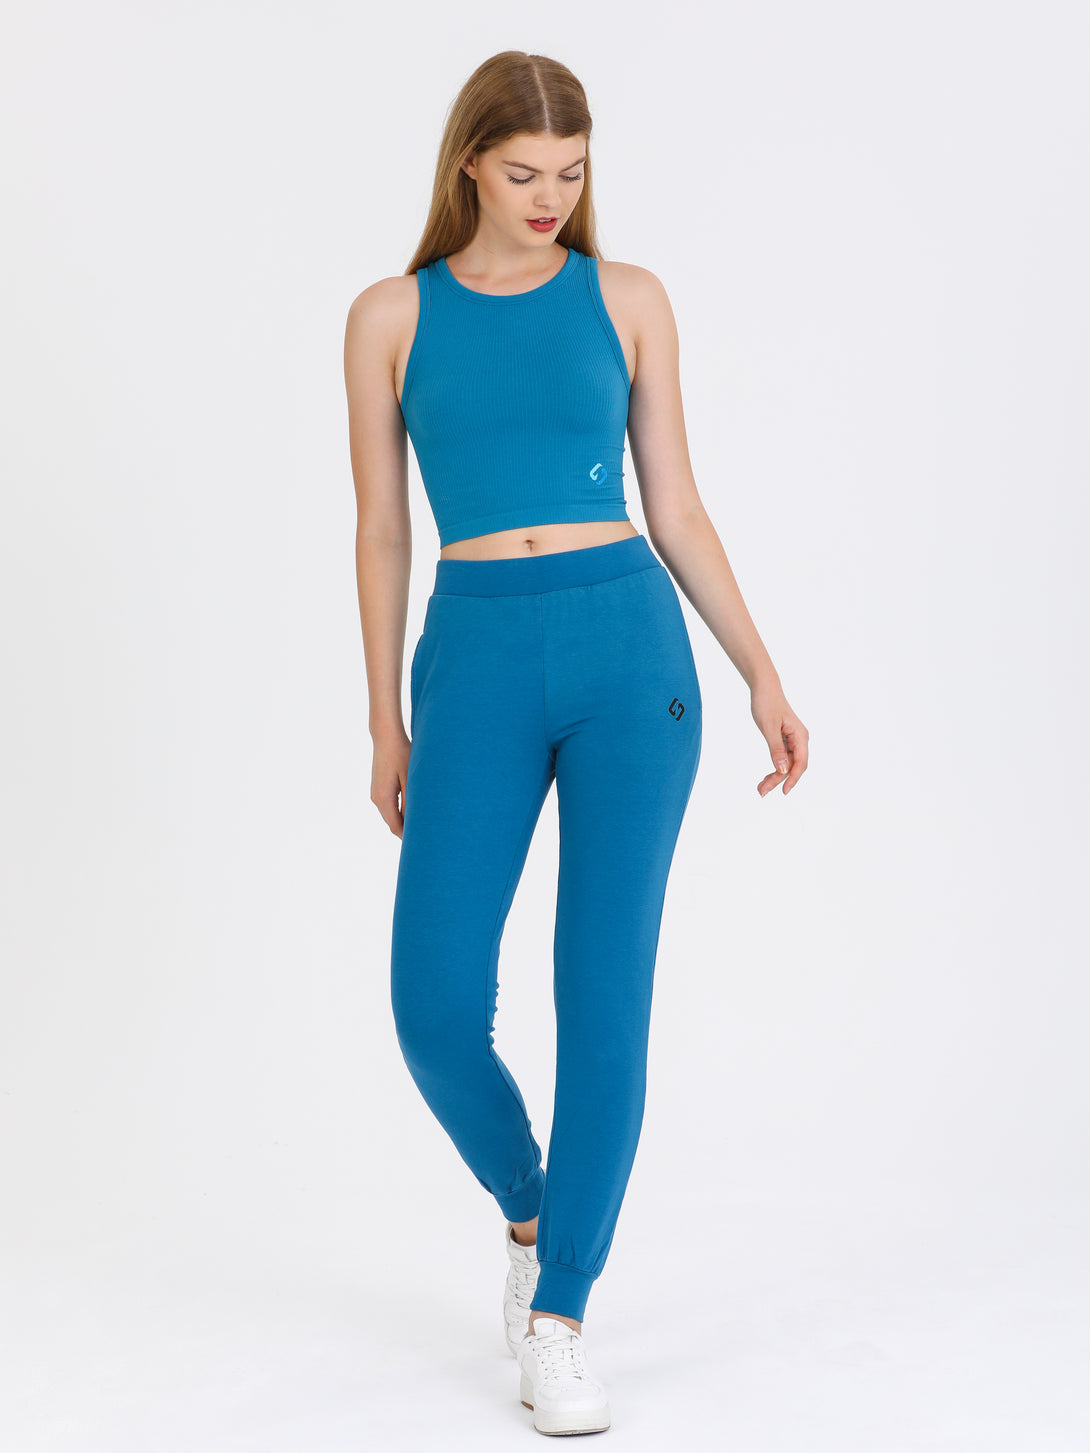 A Woman Wearing Saxony Blue Color All-Day Sleeveless Strapped Crop Top